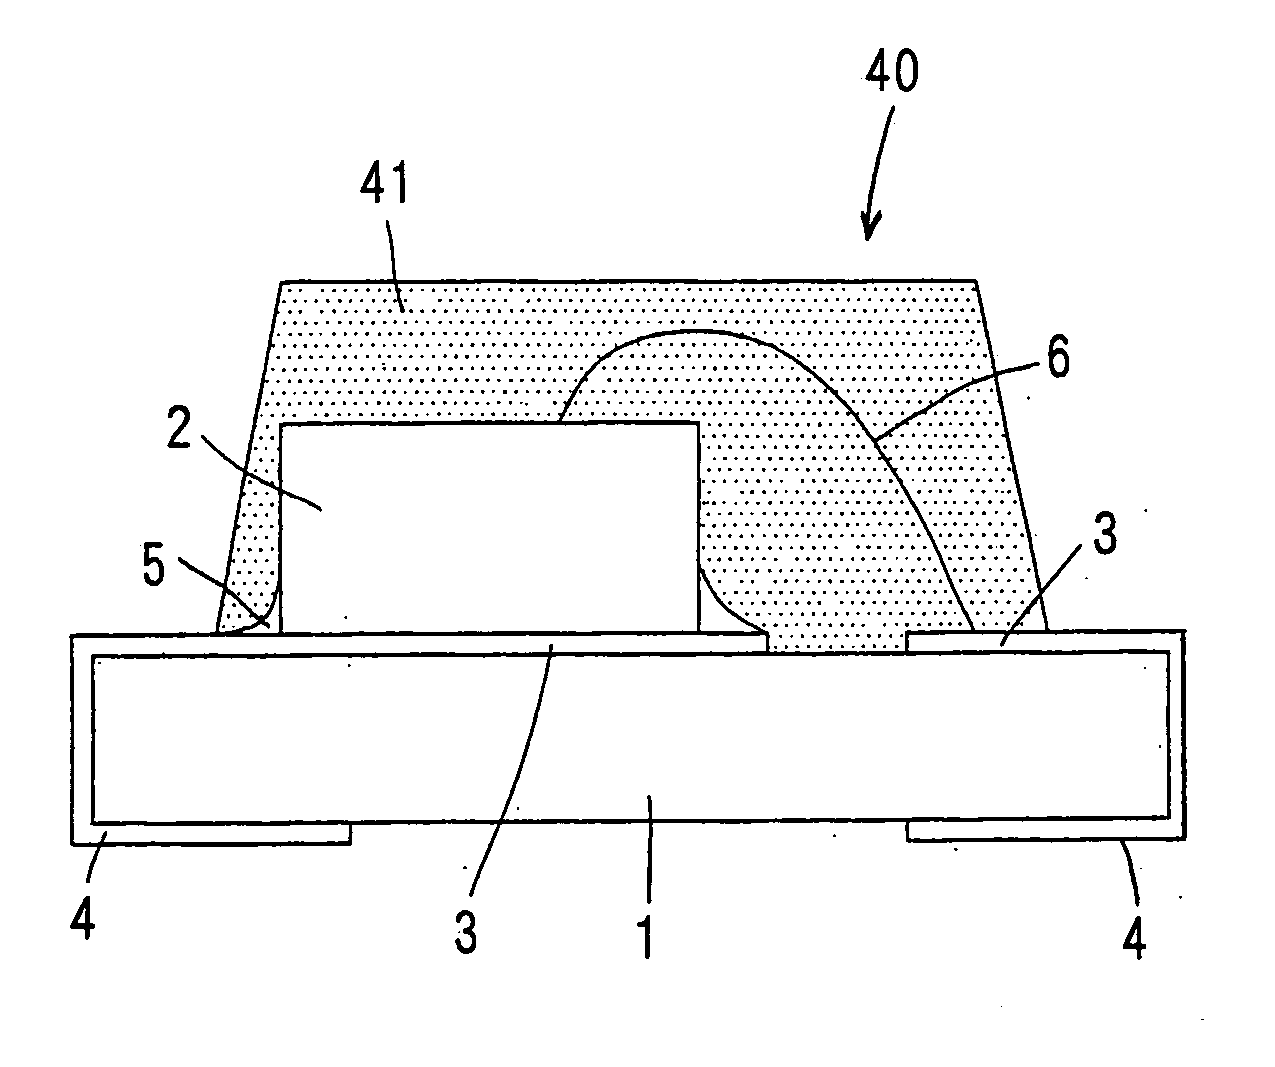 Transparent resin composition for optical sensor filter, optical sensor, and process of producing method therefor